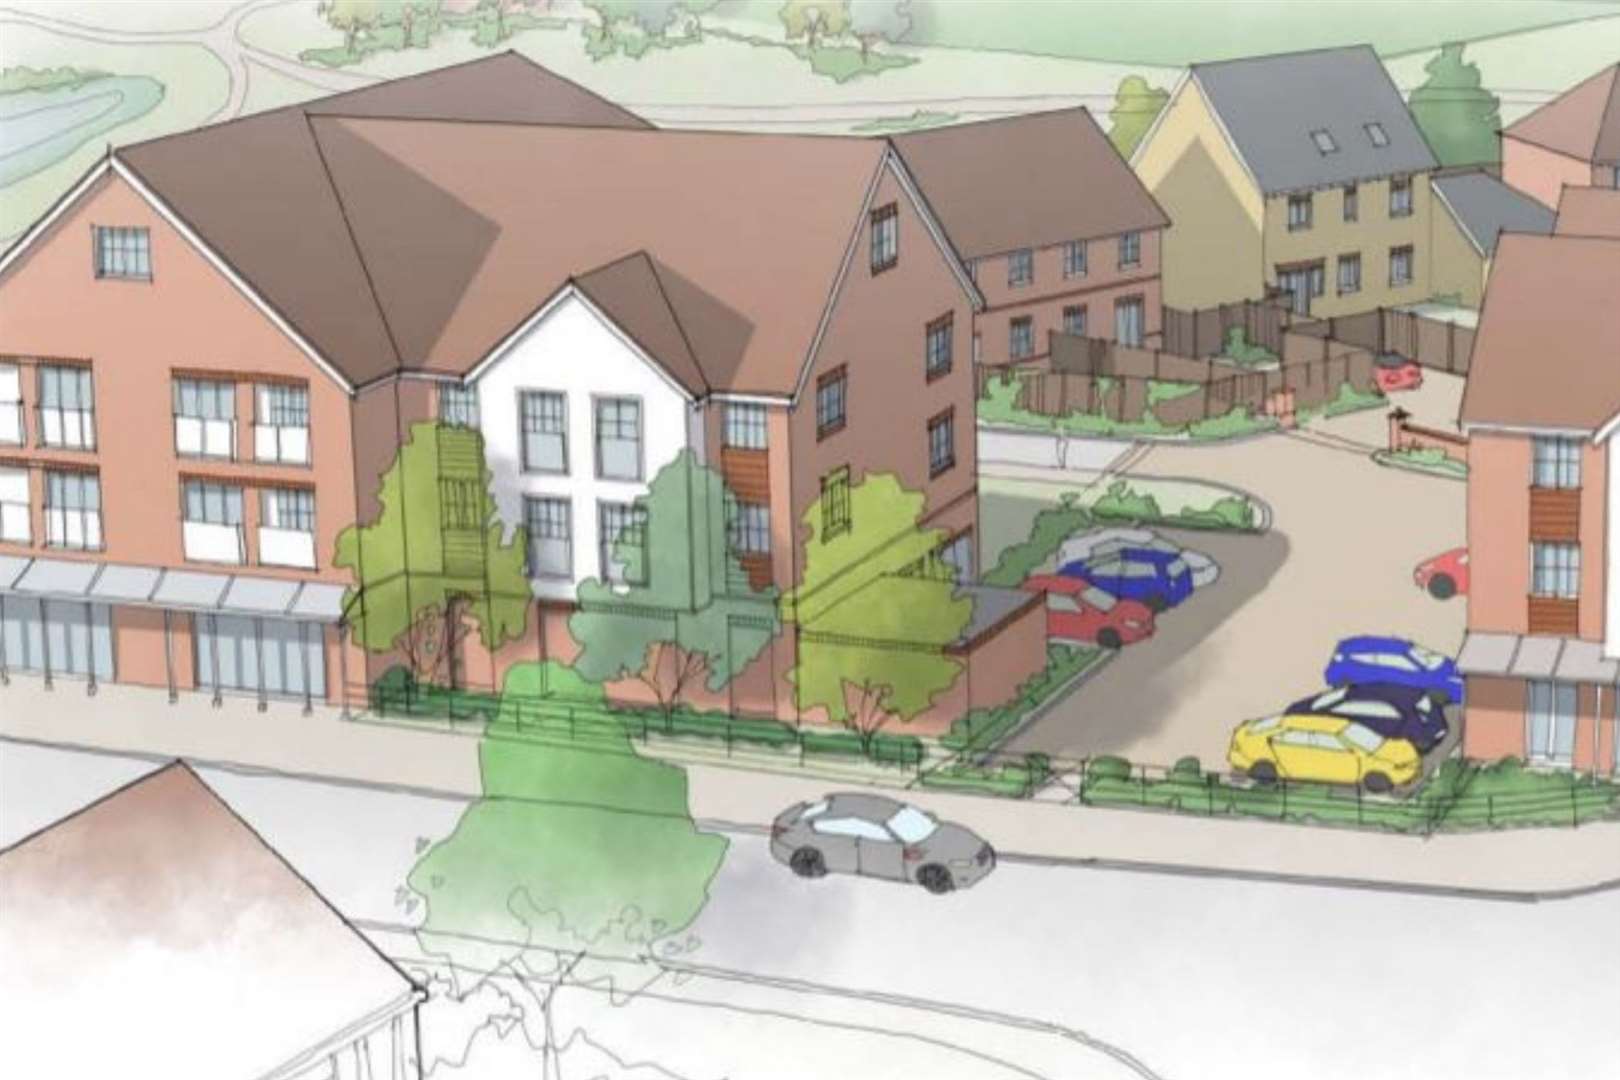 A sketch of the proposed housing development